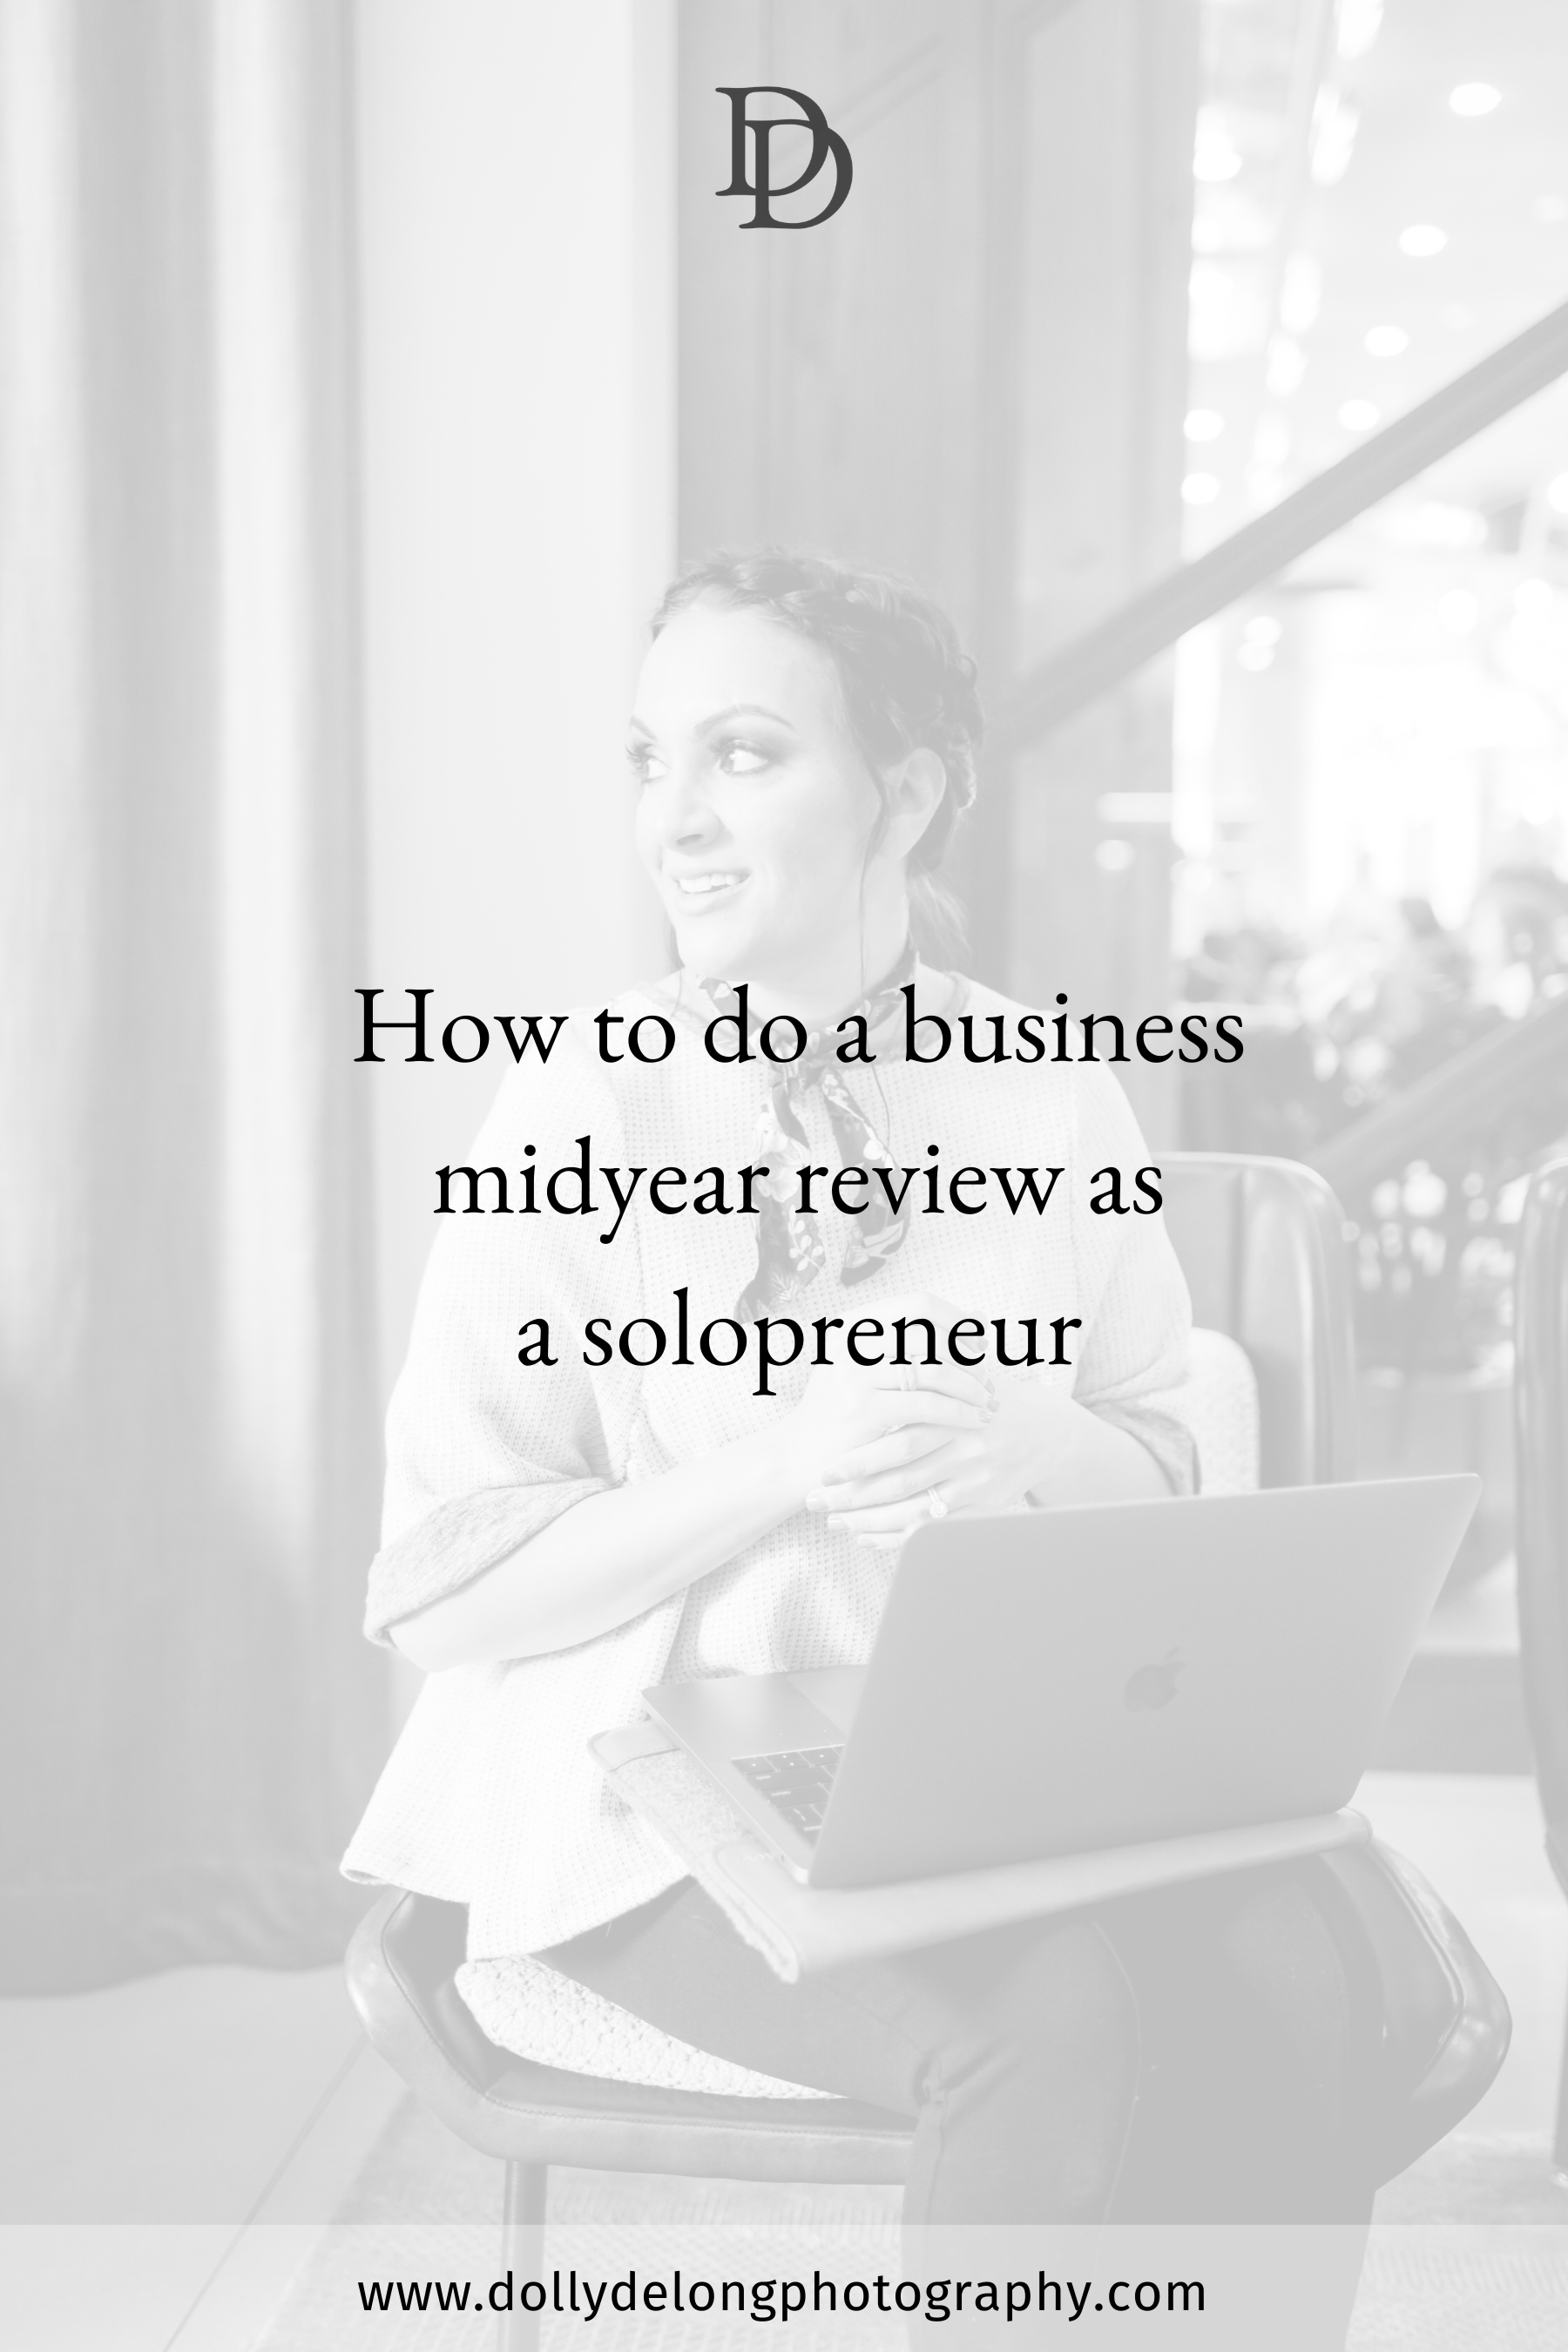 How to do a business midyear review as a solopreneur. by Nashville Branding Photographer Dolly DeLong